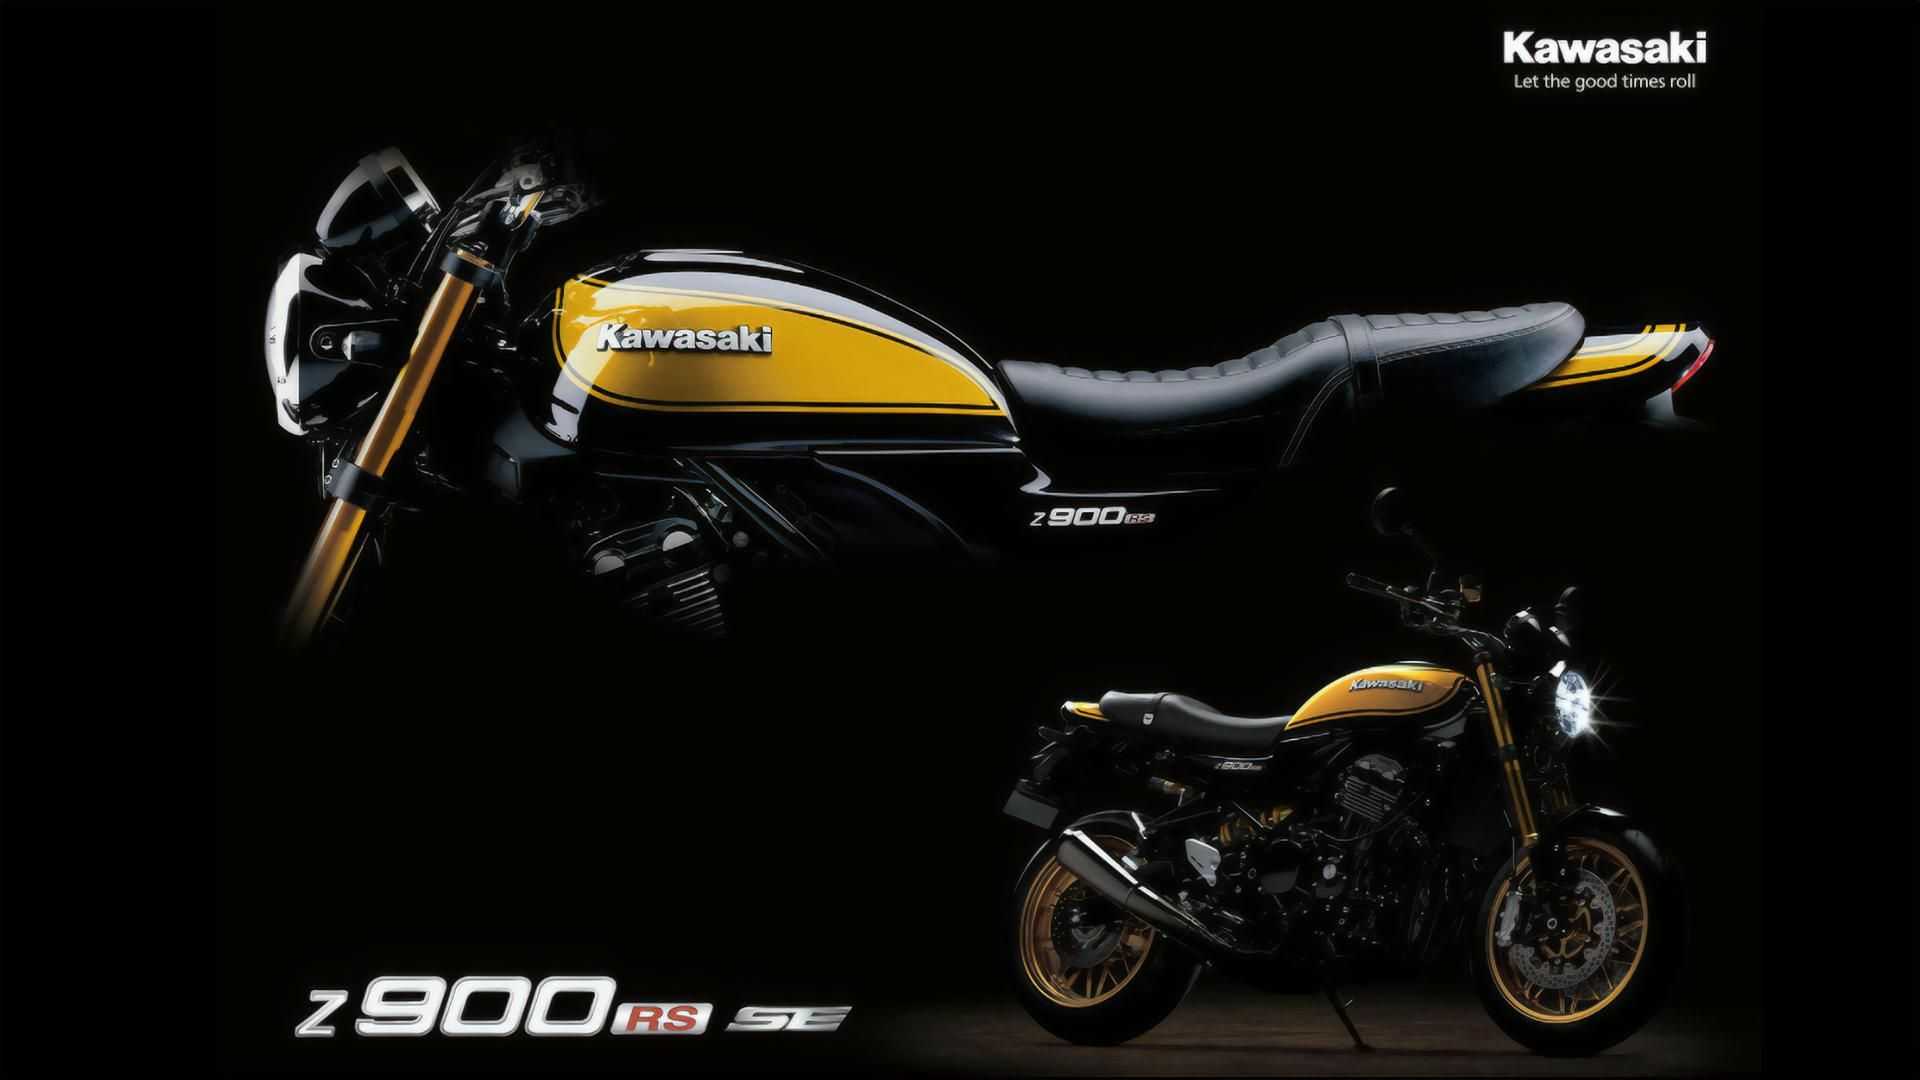 A side profile of the all-new Z9000RS SE